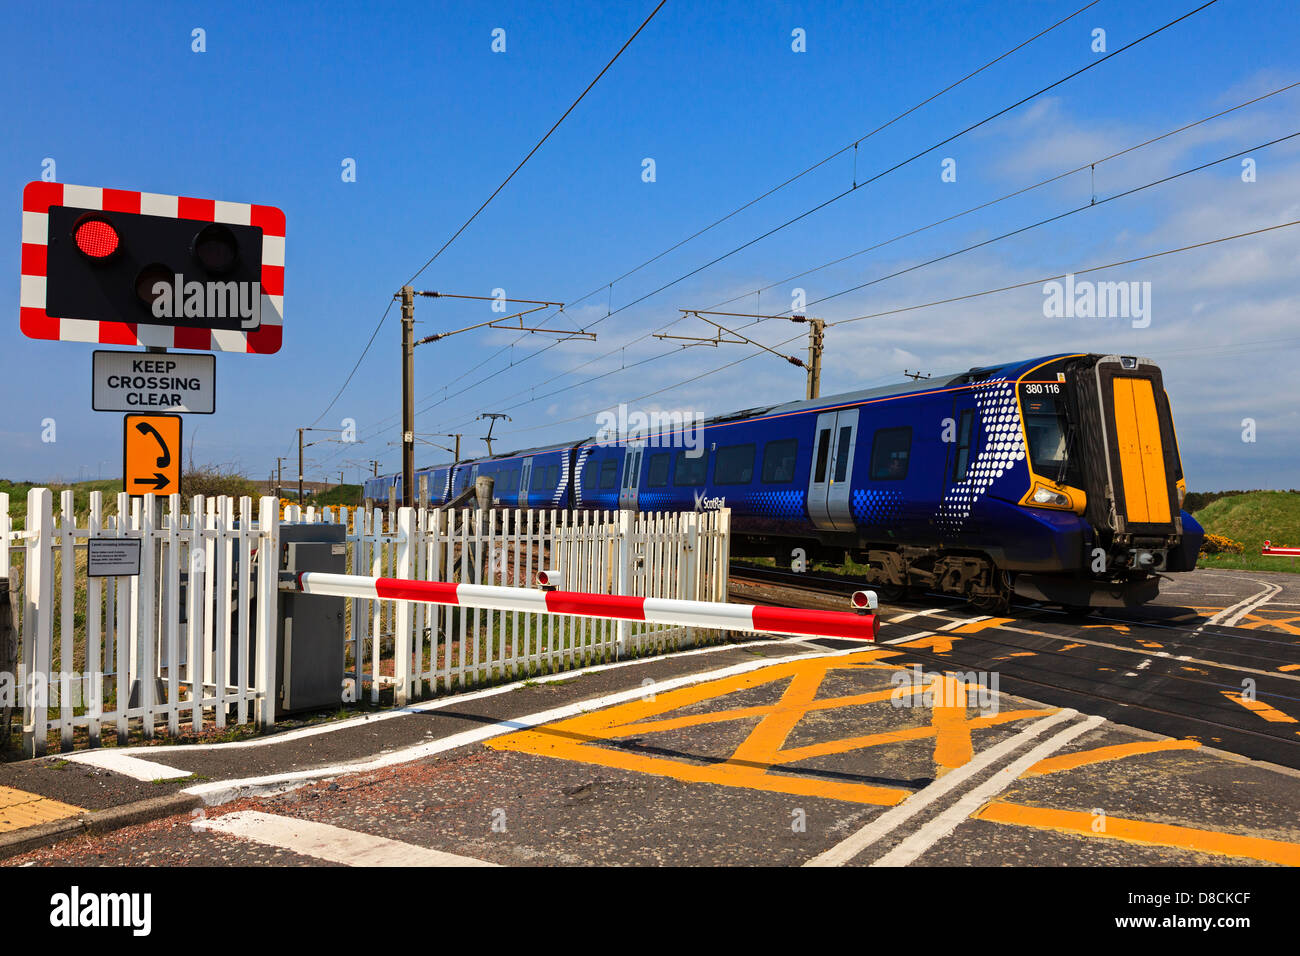 Electric train travelling across a controlled crossing, showing the traffic lights and control barrier, Ayrshire, Scotland, UK Stock Photo